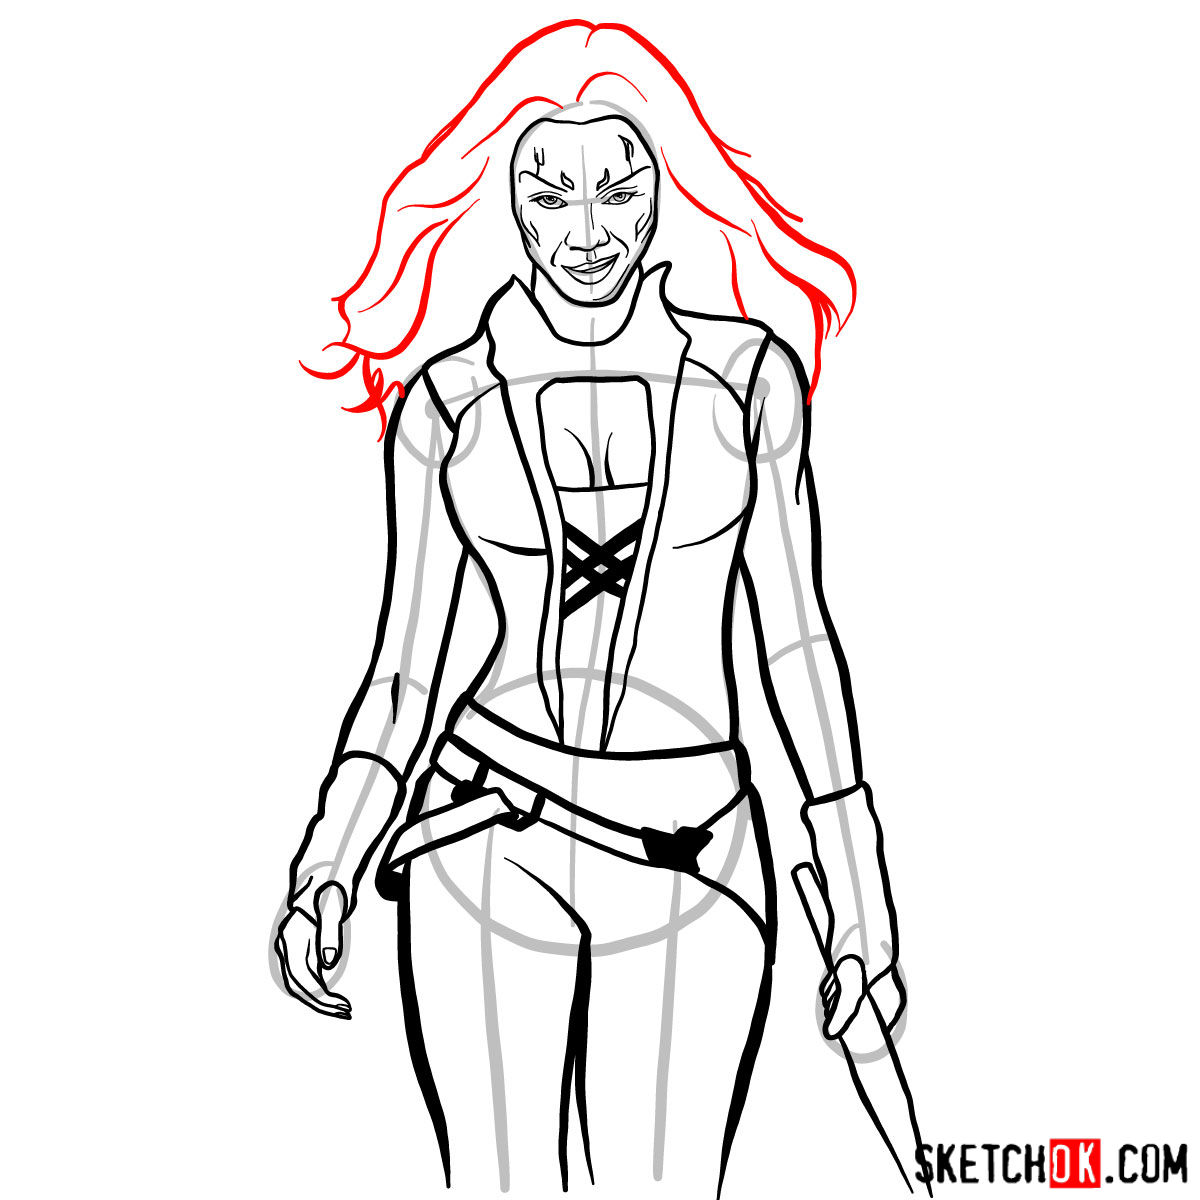 How to draw Gamora from Guardians of the Galaxy - step 12